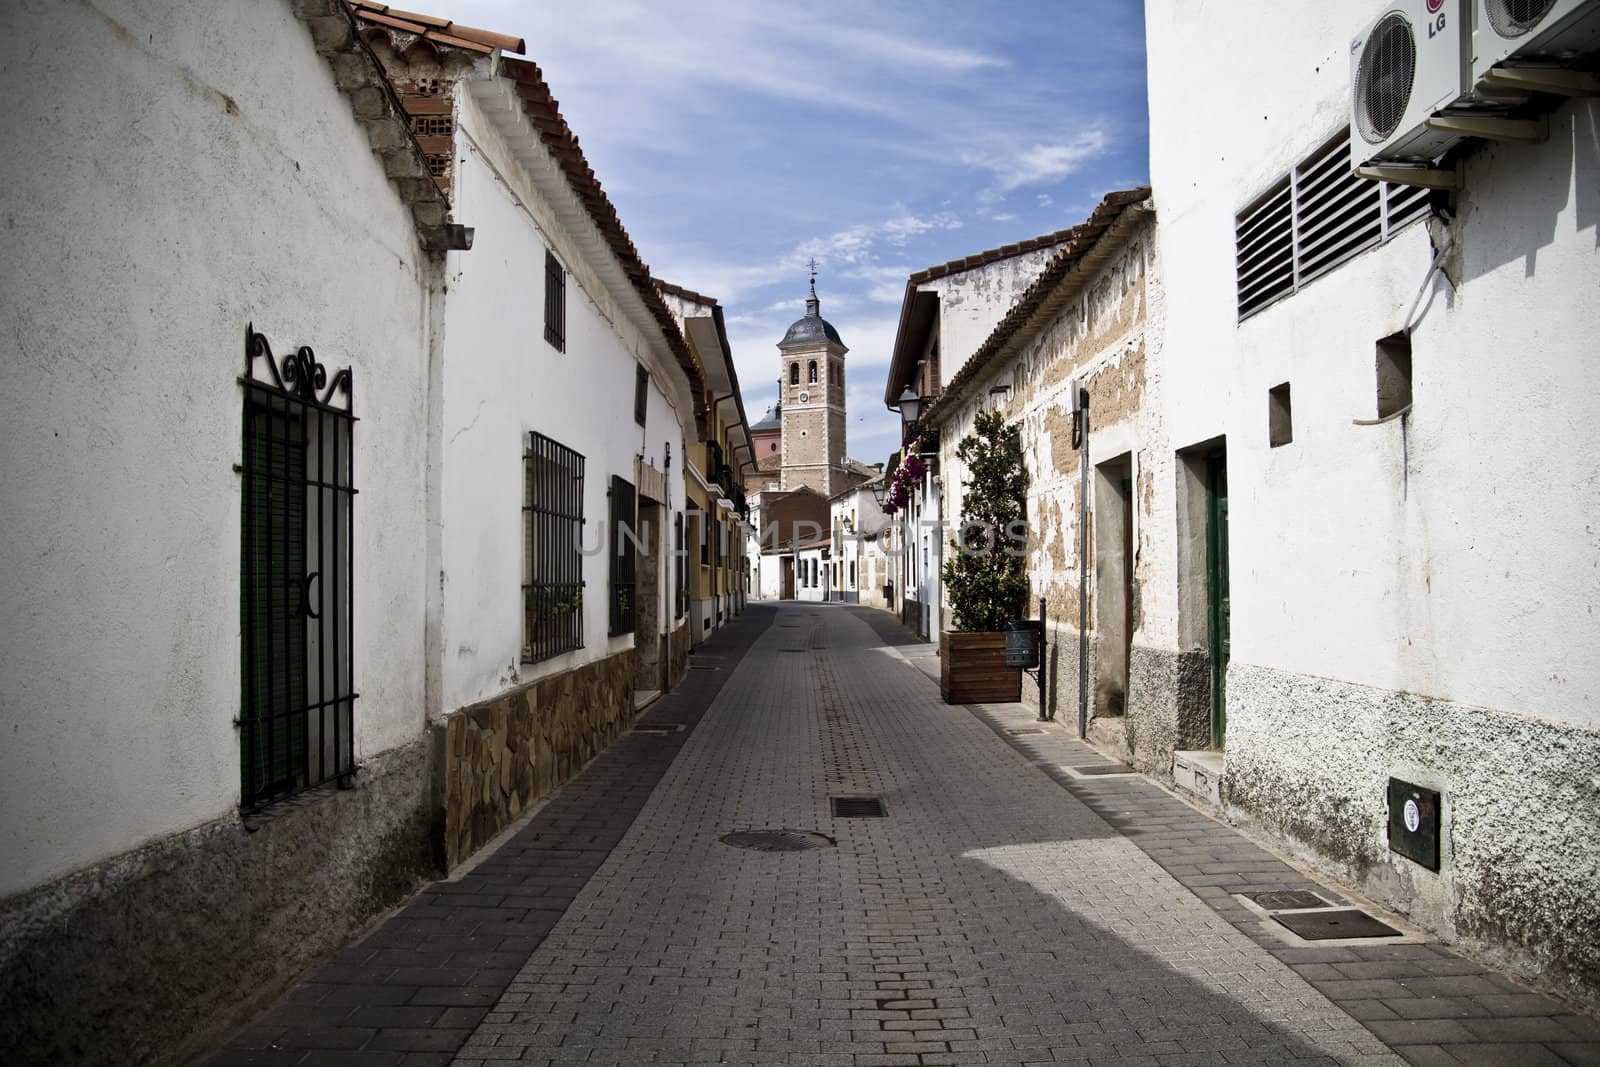 Town of white houses, typical Spanish architecture by FernandoCortes